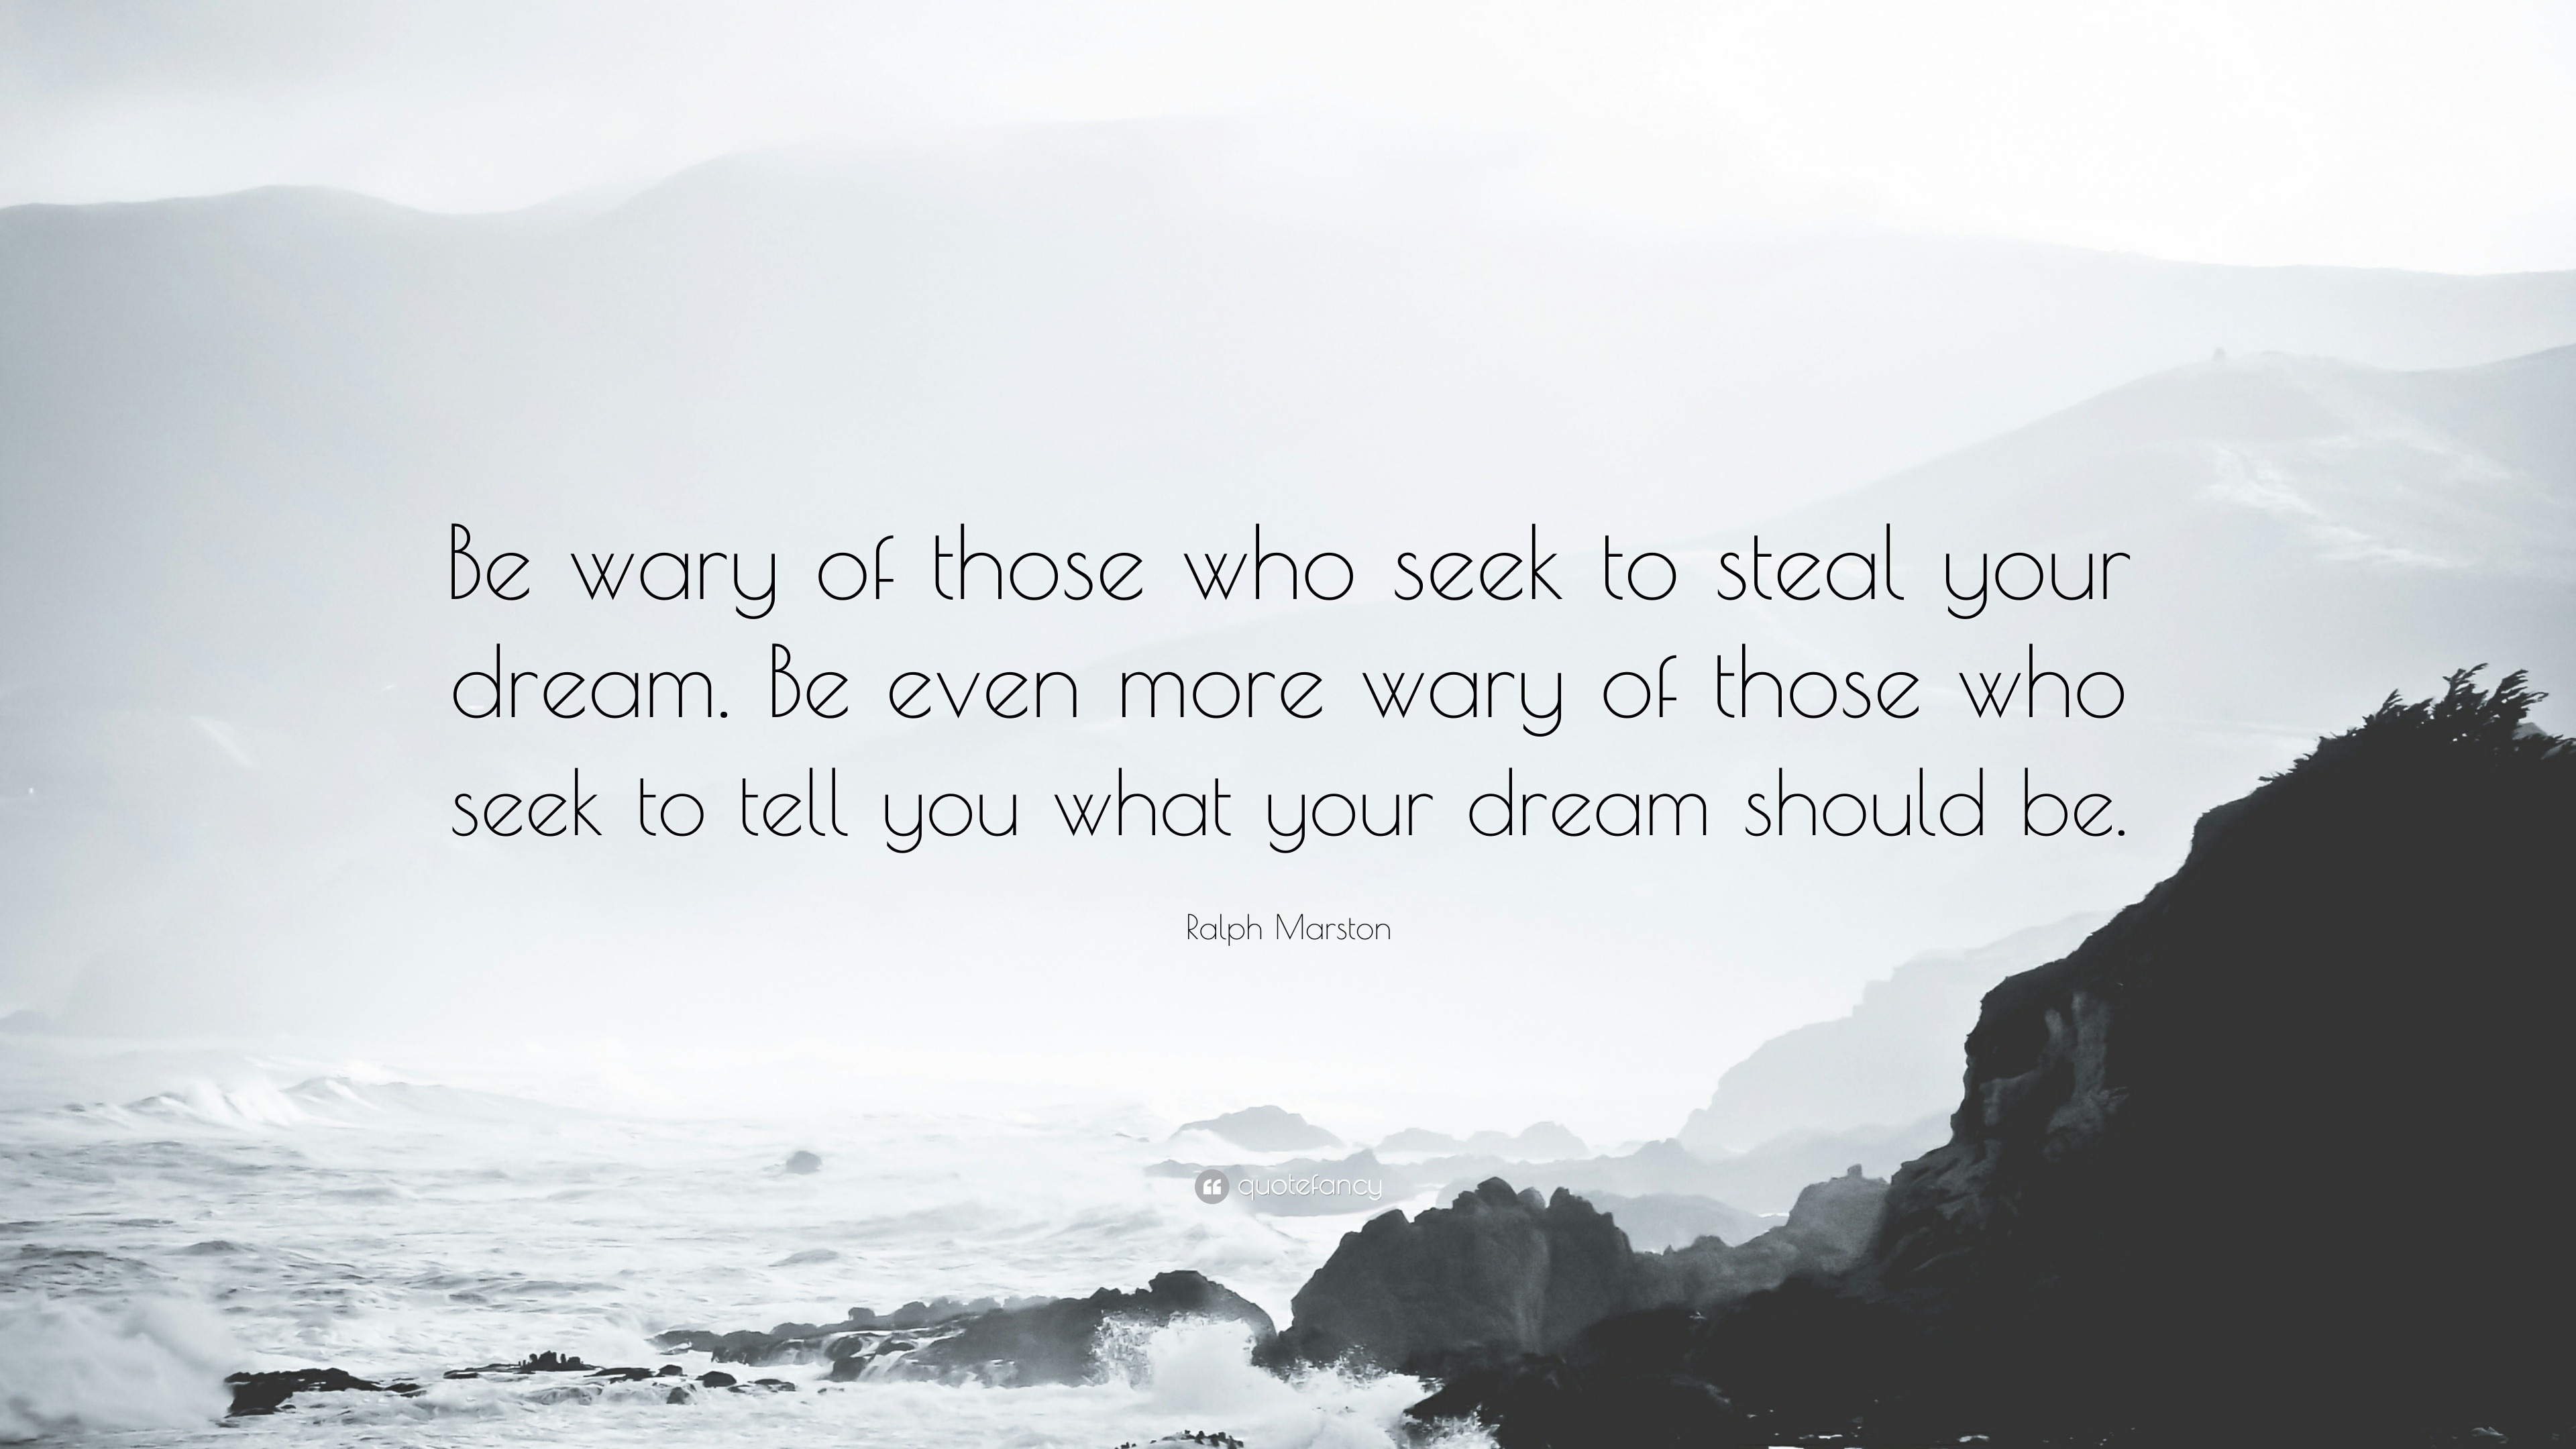 Ralph Marston Quote Be Wary Of Those Who Seek To Steal Your Dream Be Even More Wary Of Those Who Seek To Tell You What Your Dream Should Be